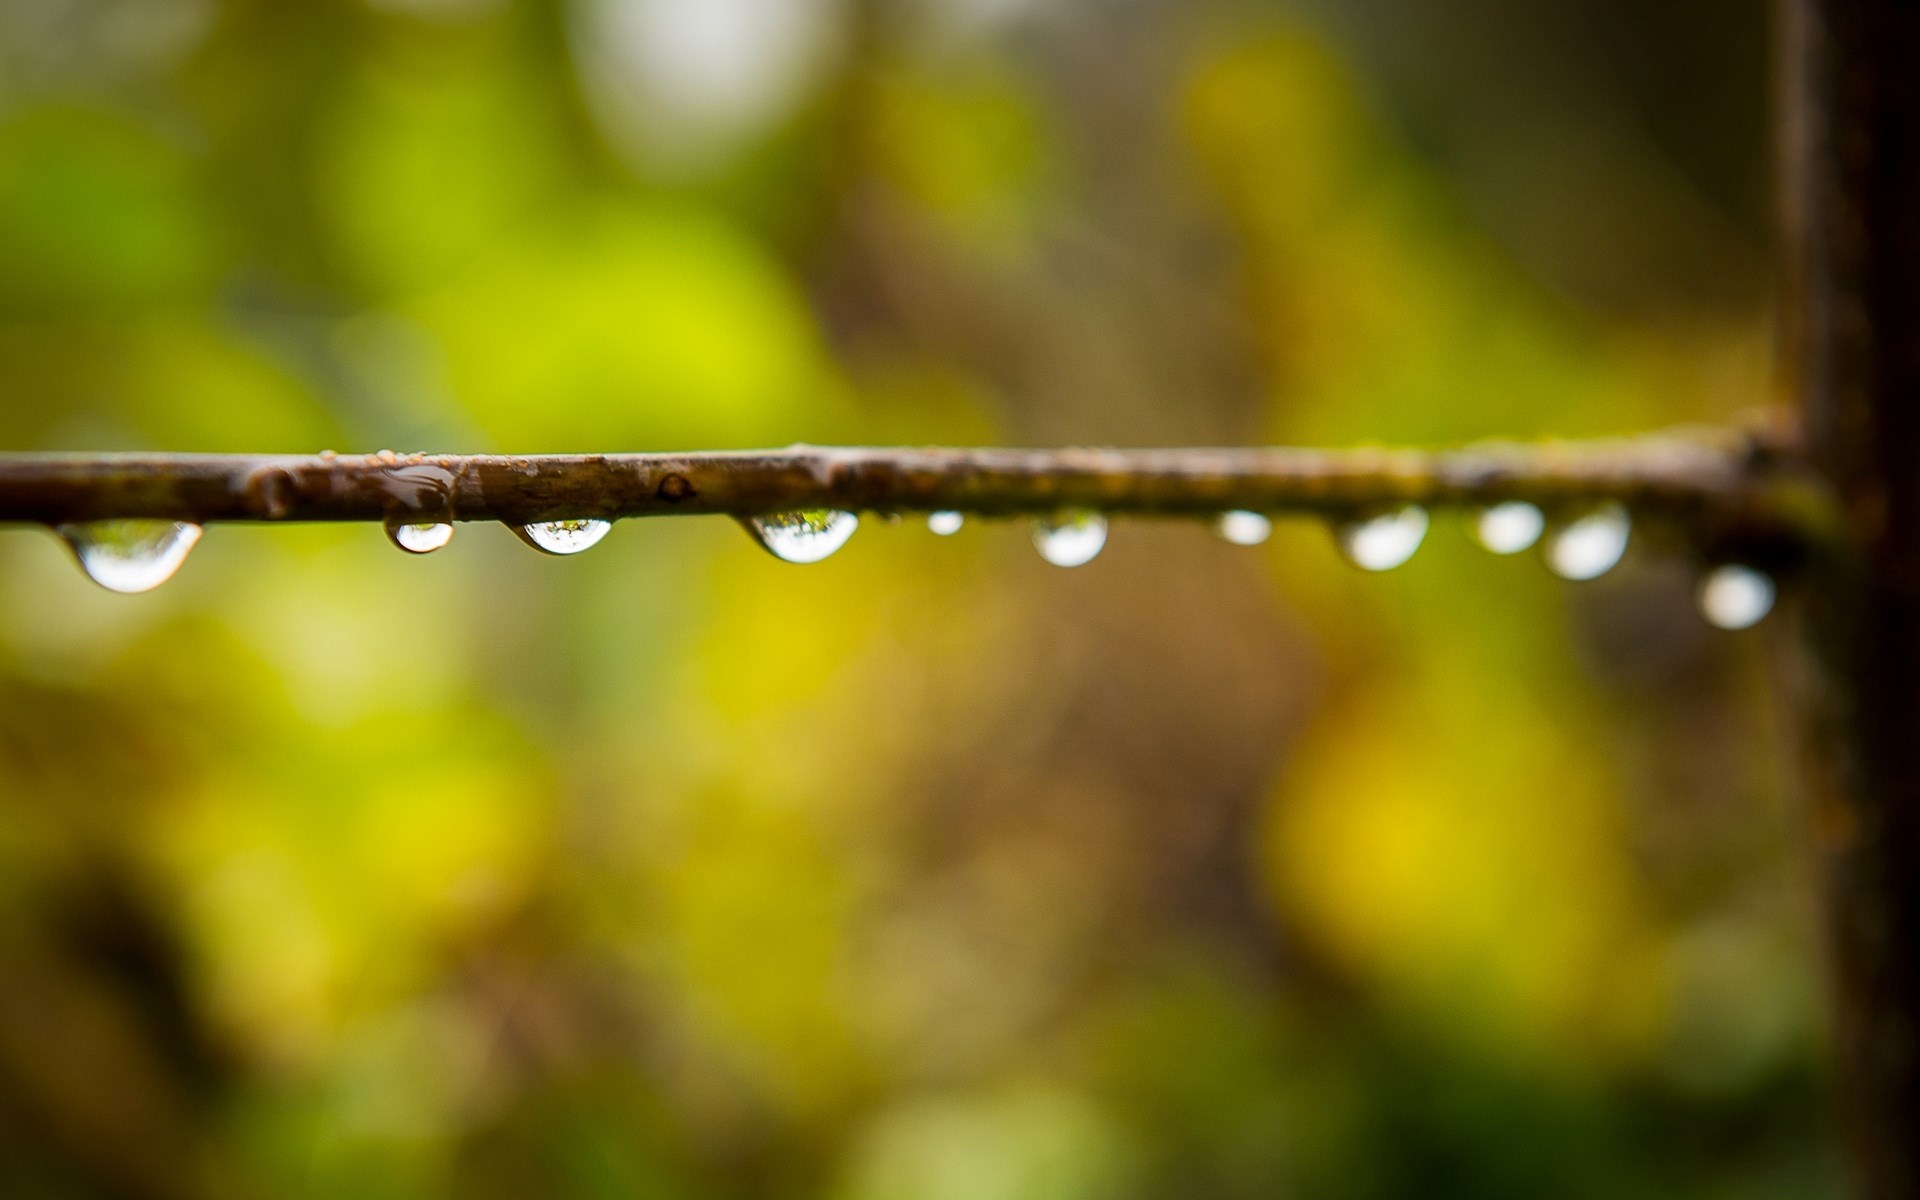 Rain HD Wallpaper For Desktop One Pictures Background